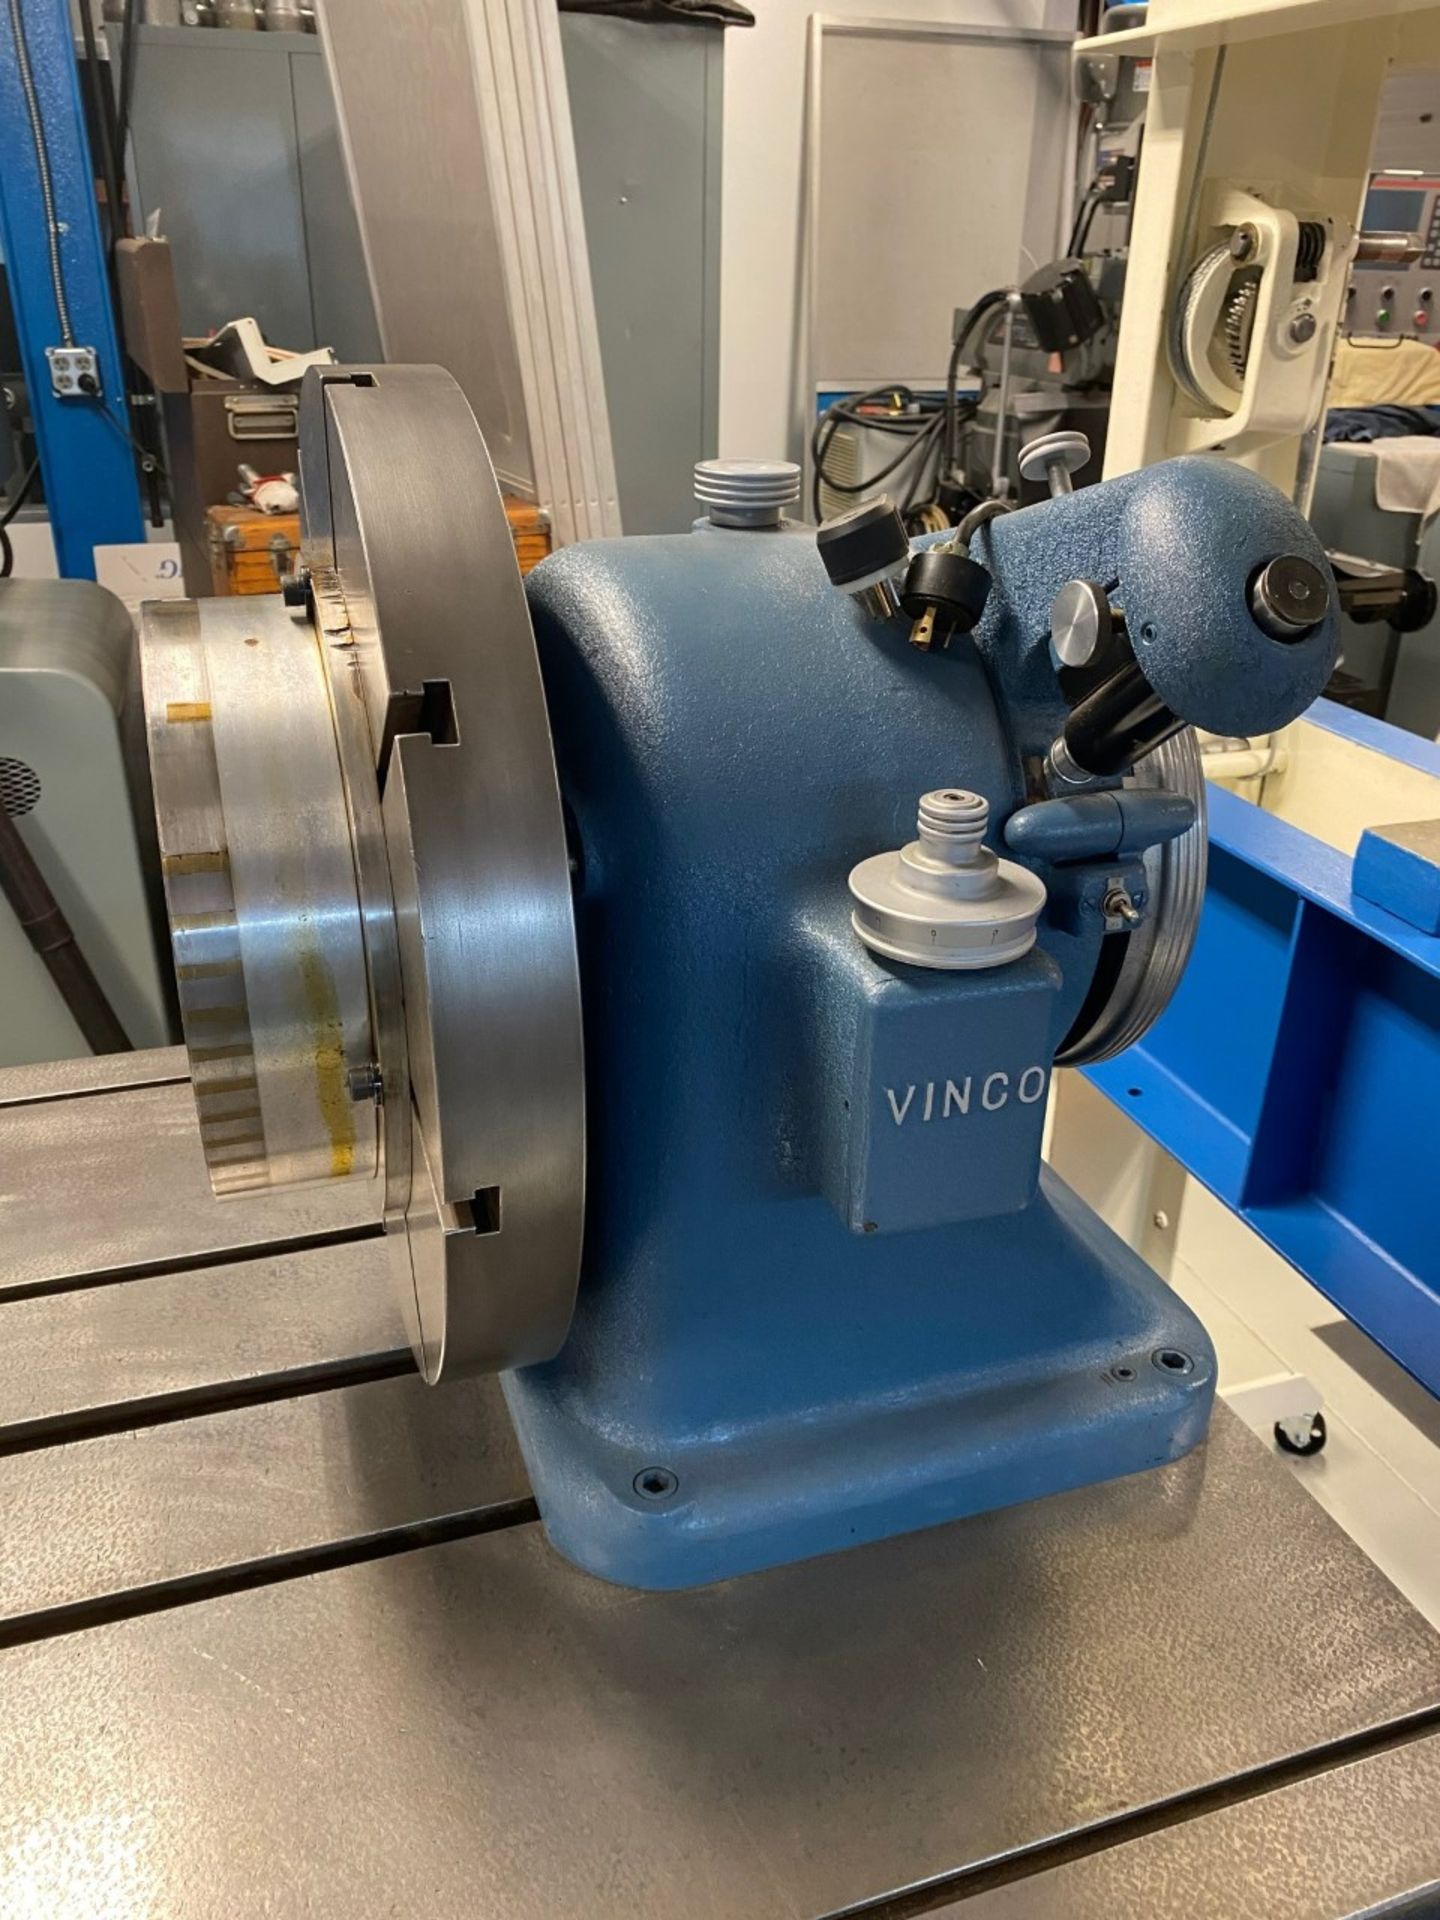 18" Vinco Precision Gear Inspection Unit with: Rotary Table, Tailstock on T-Slotted Base - Image 4 of 4